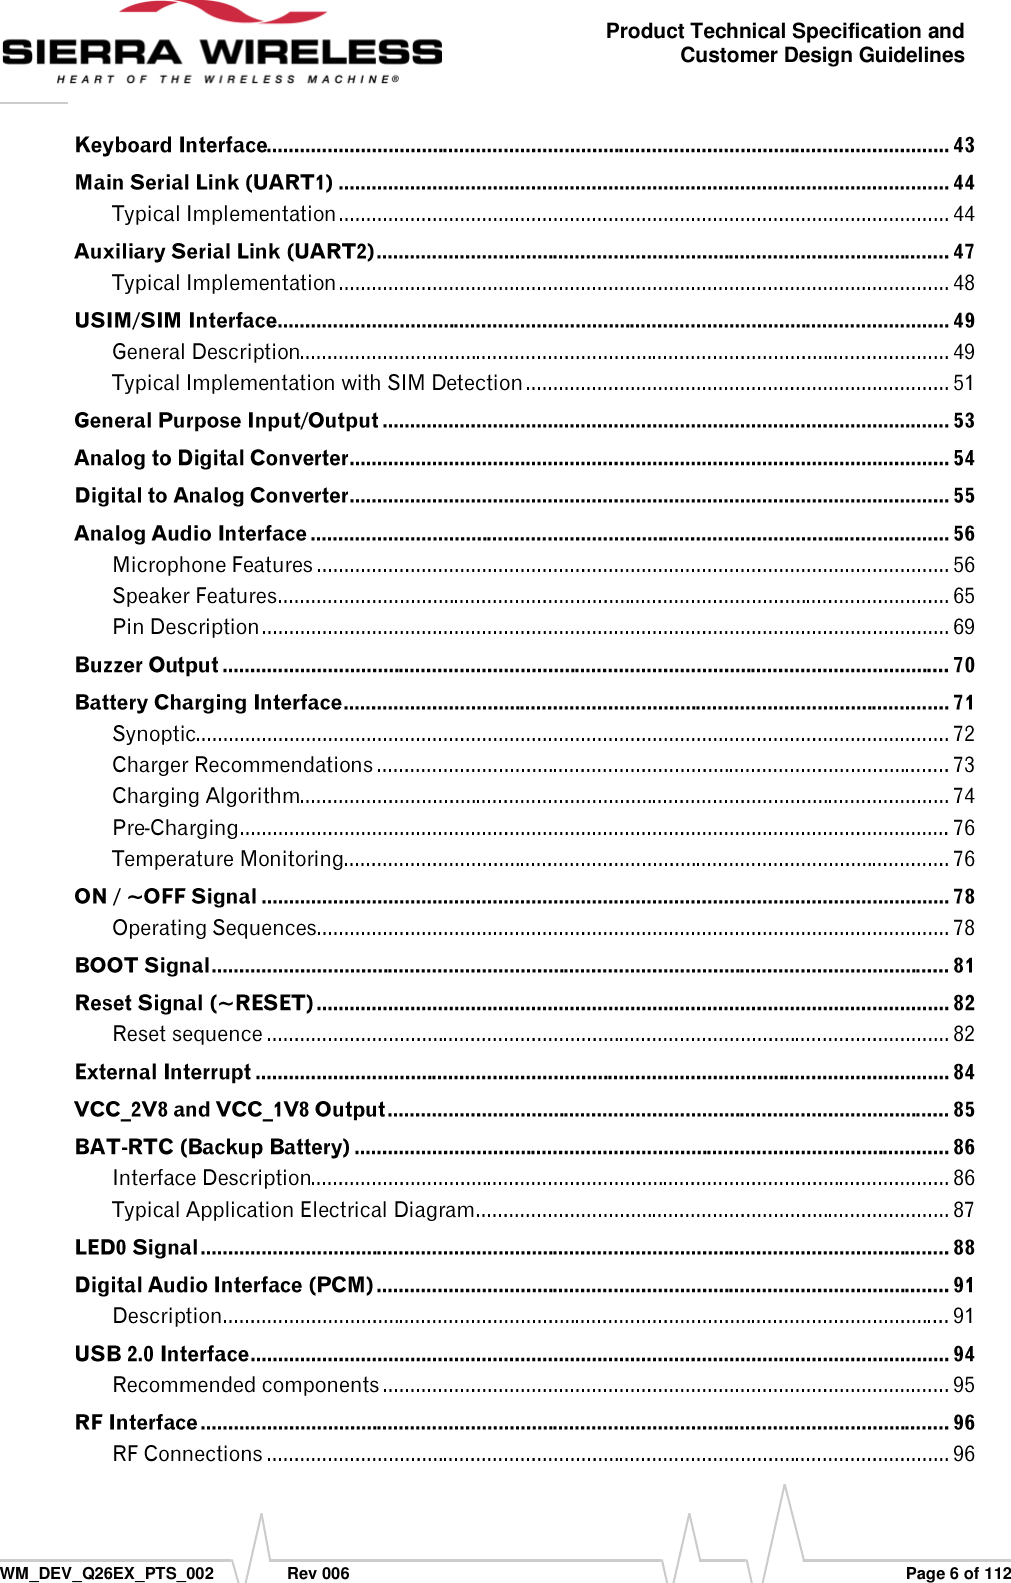      WM_DEV_Q26EX_PTS_002  Rev 006  Page 6 of 112 Product Technical Specification and Customer Design Guidelines                                        